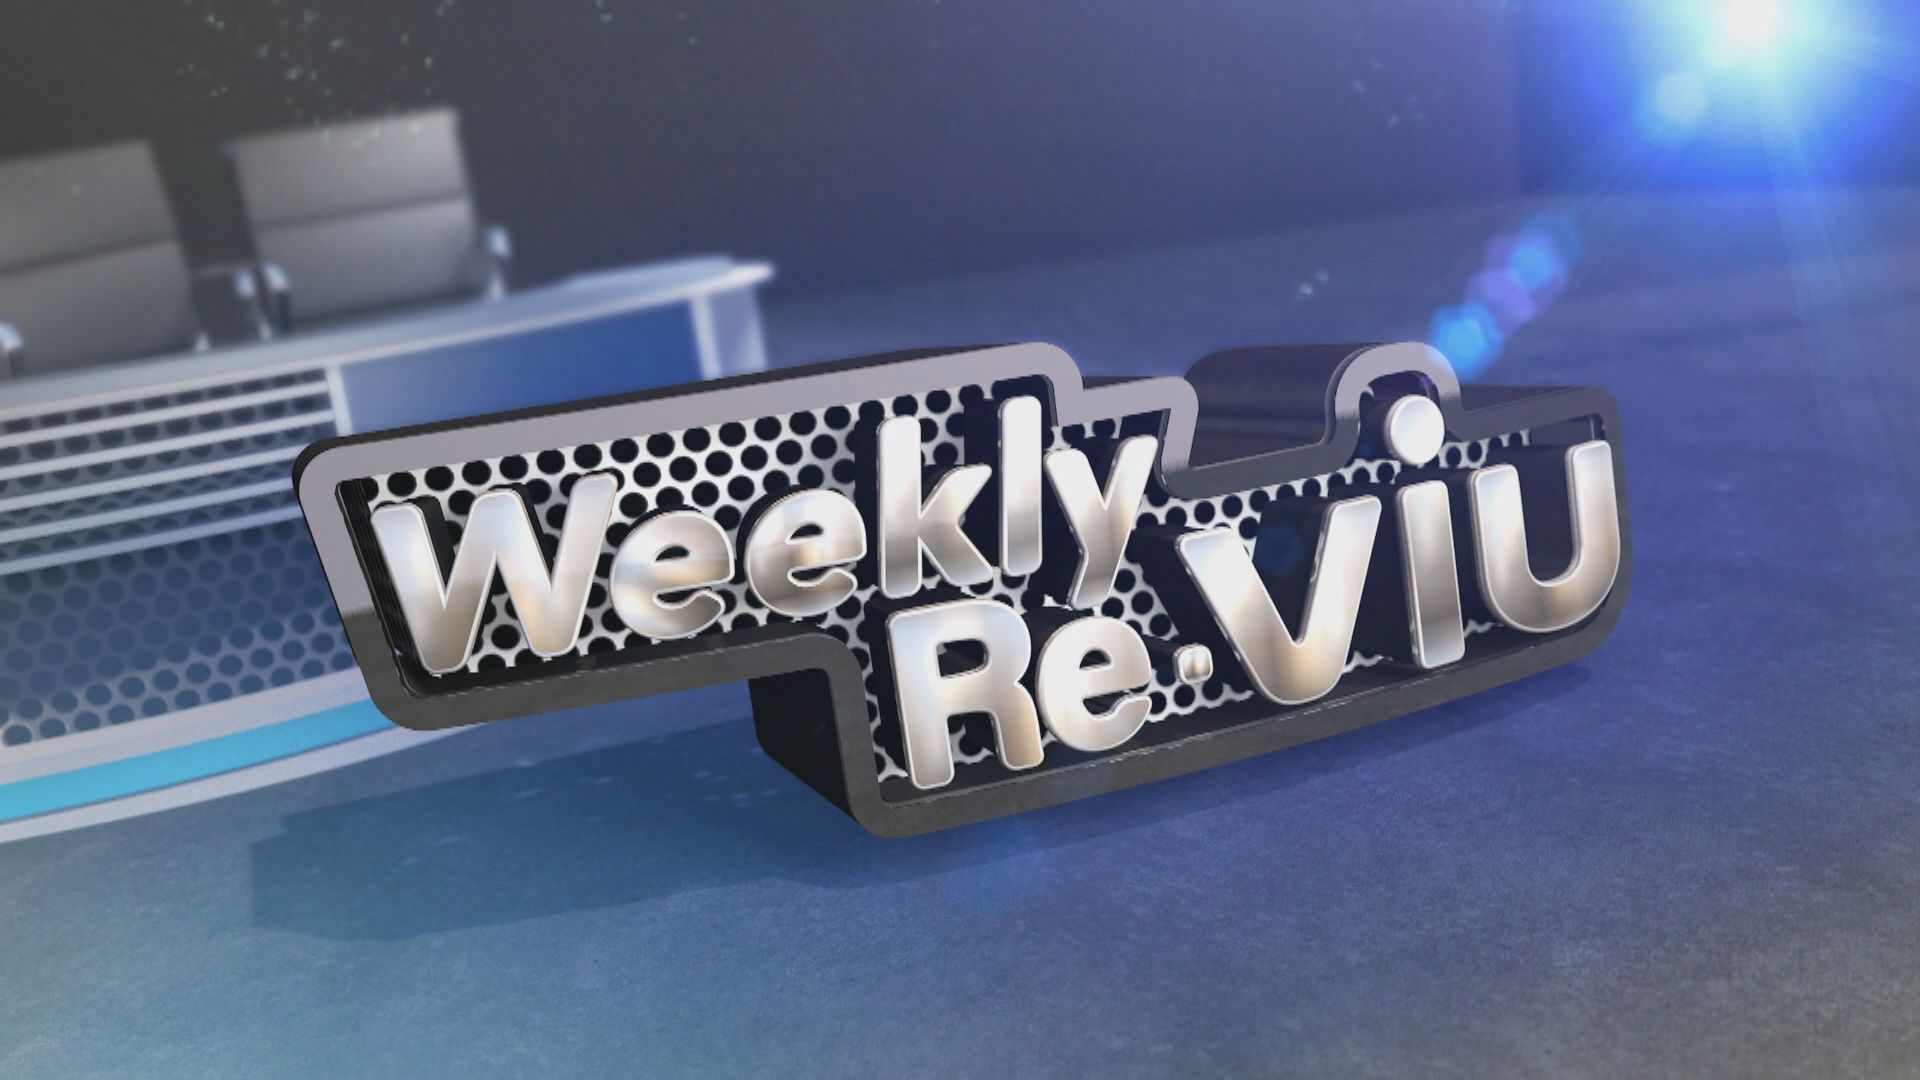 Weekly ReViu | Part Two - Story Roundup (14.1.2023)